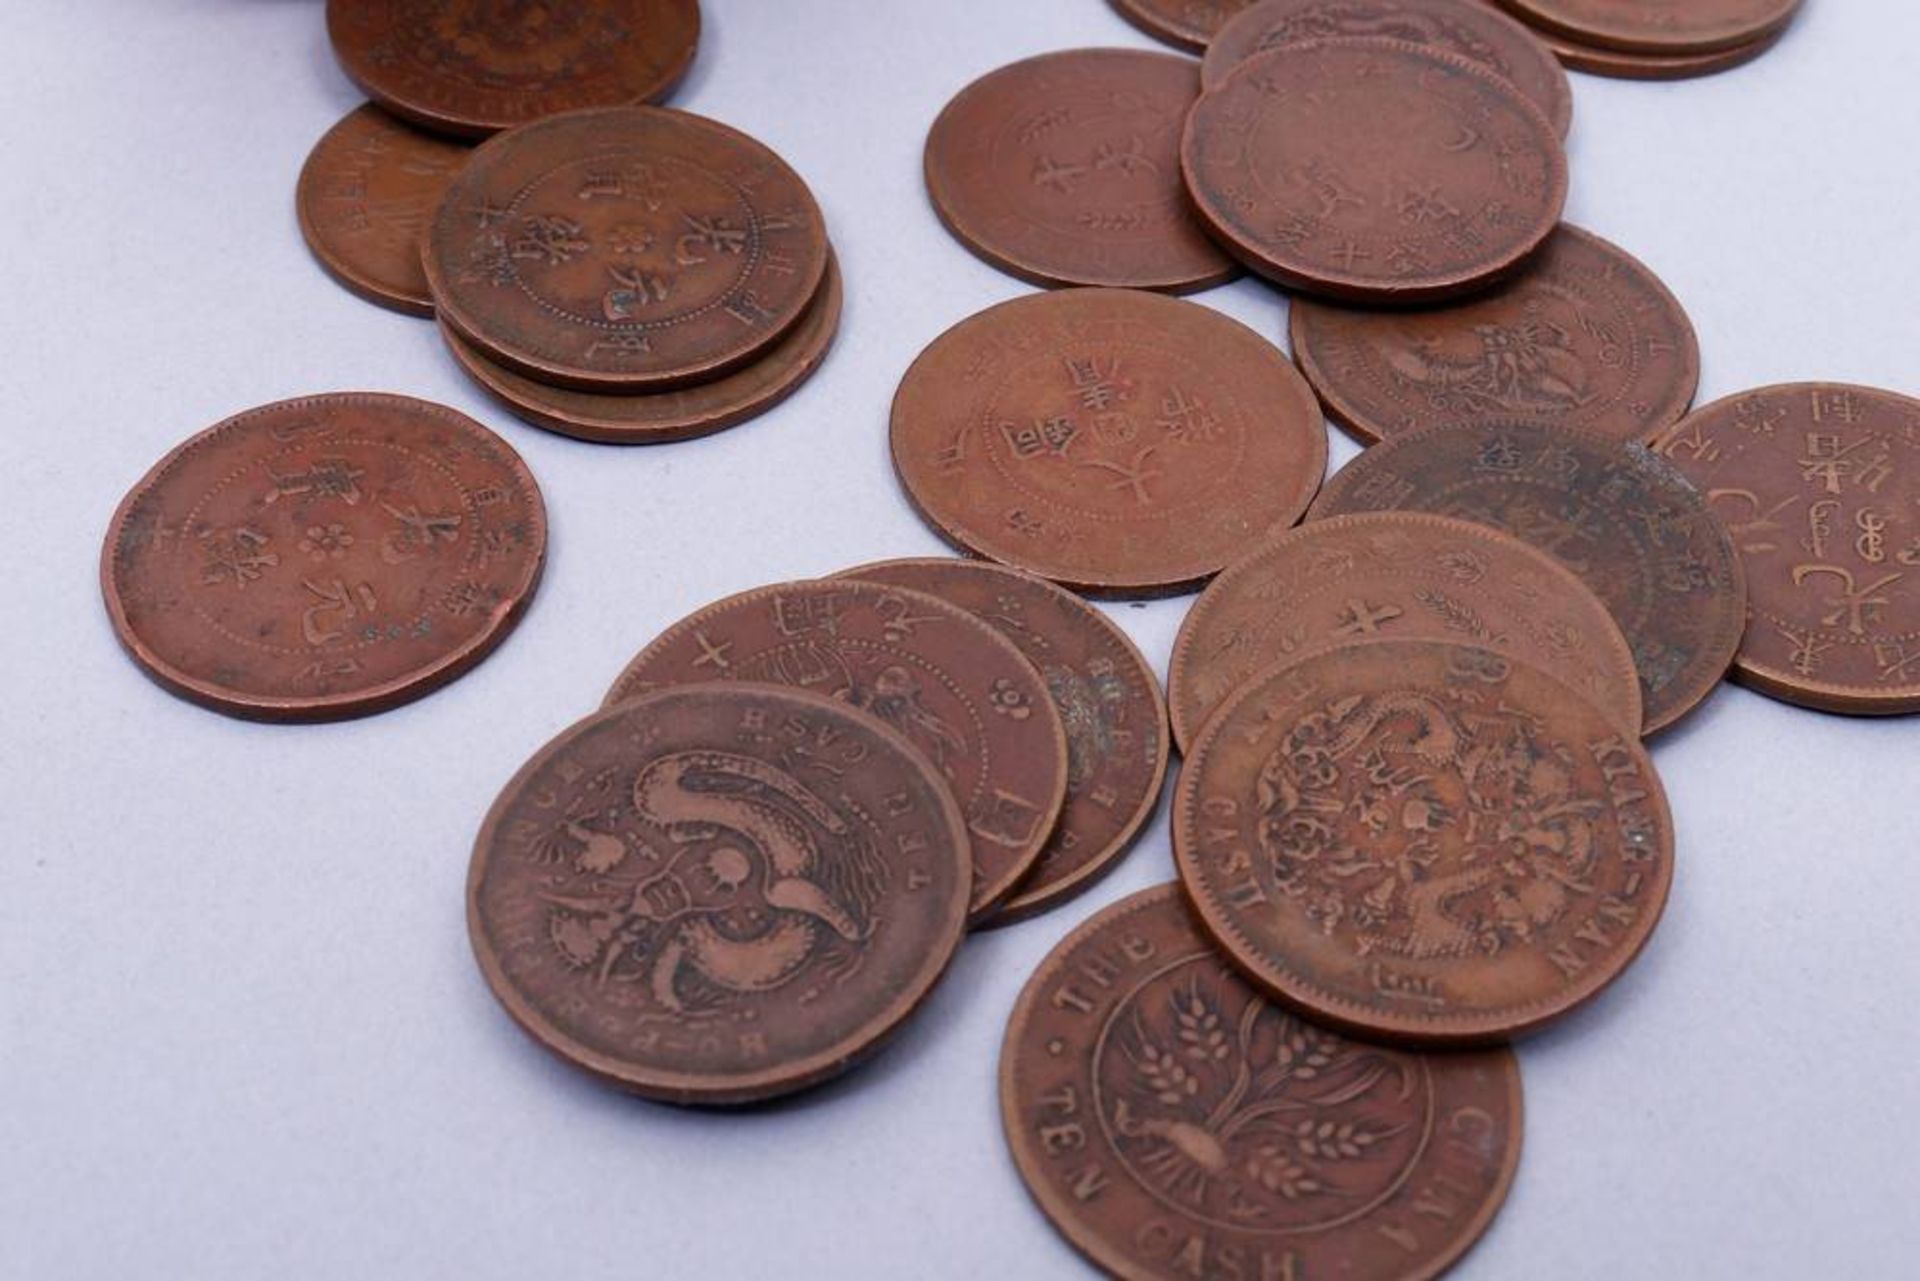 Mixed lot of copper coins, China, around 1900, 26 pieces - Image 2 of 2